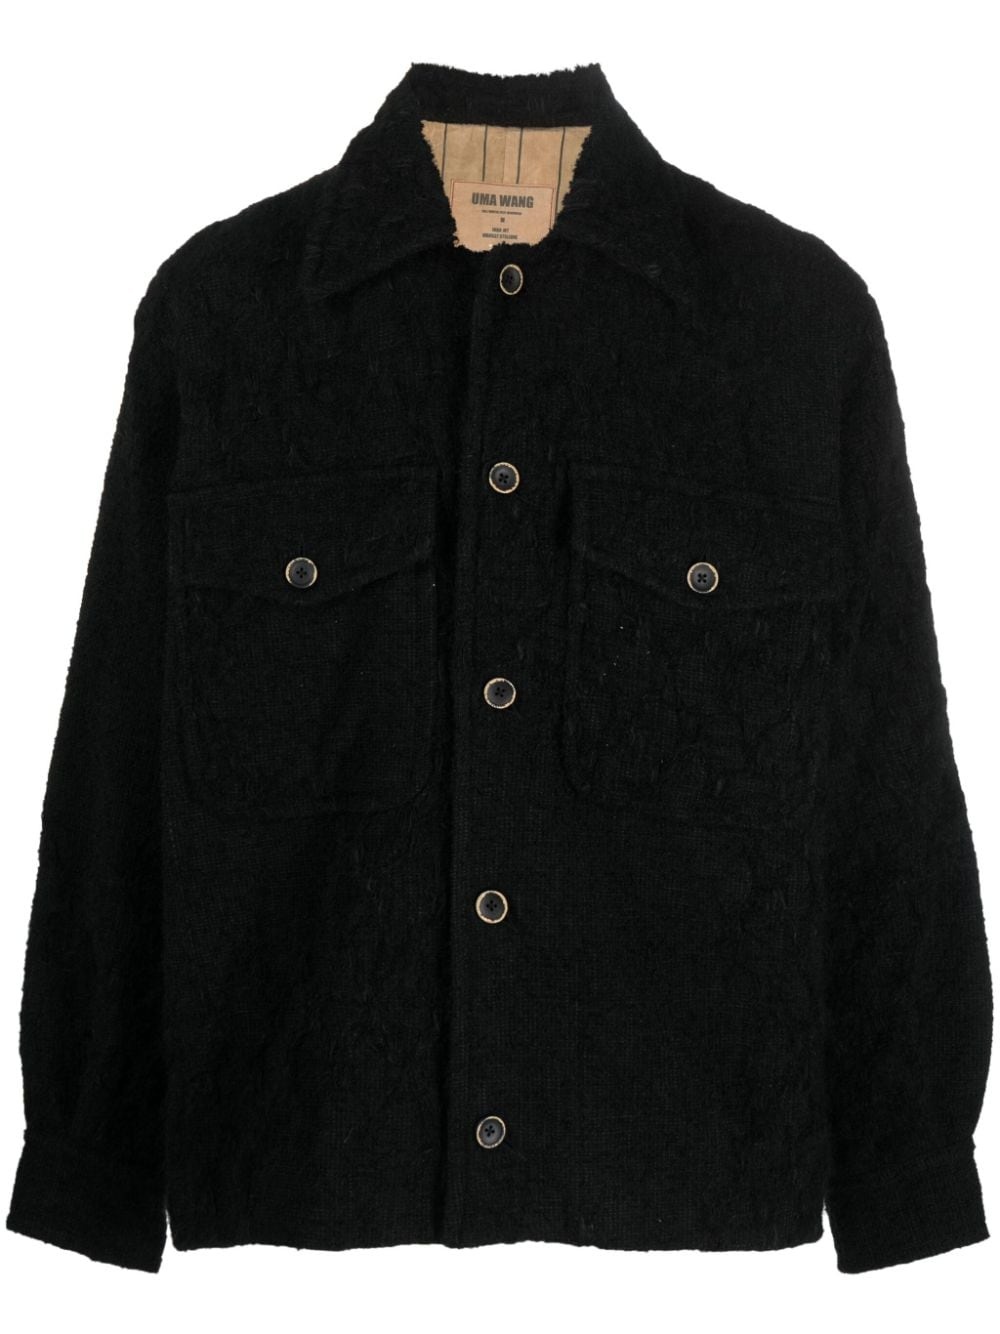 distressed-effect knitted shirt jacket - 1